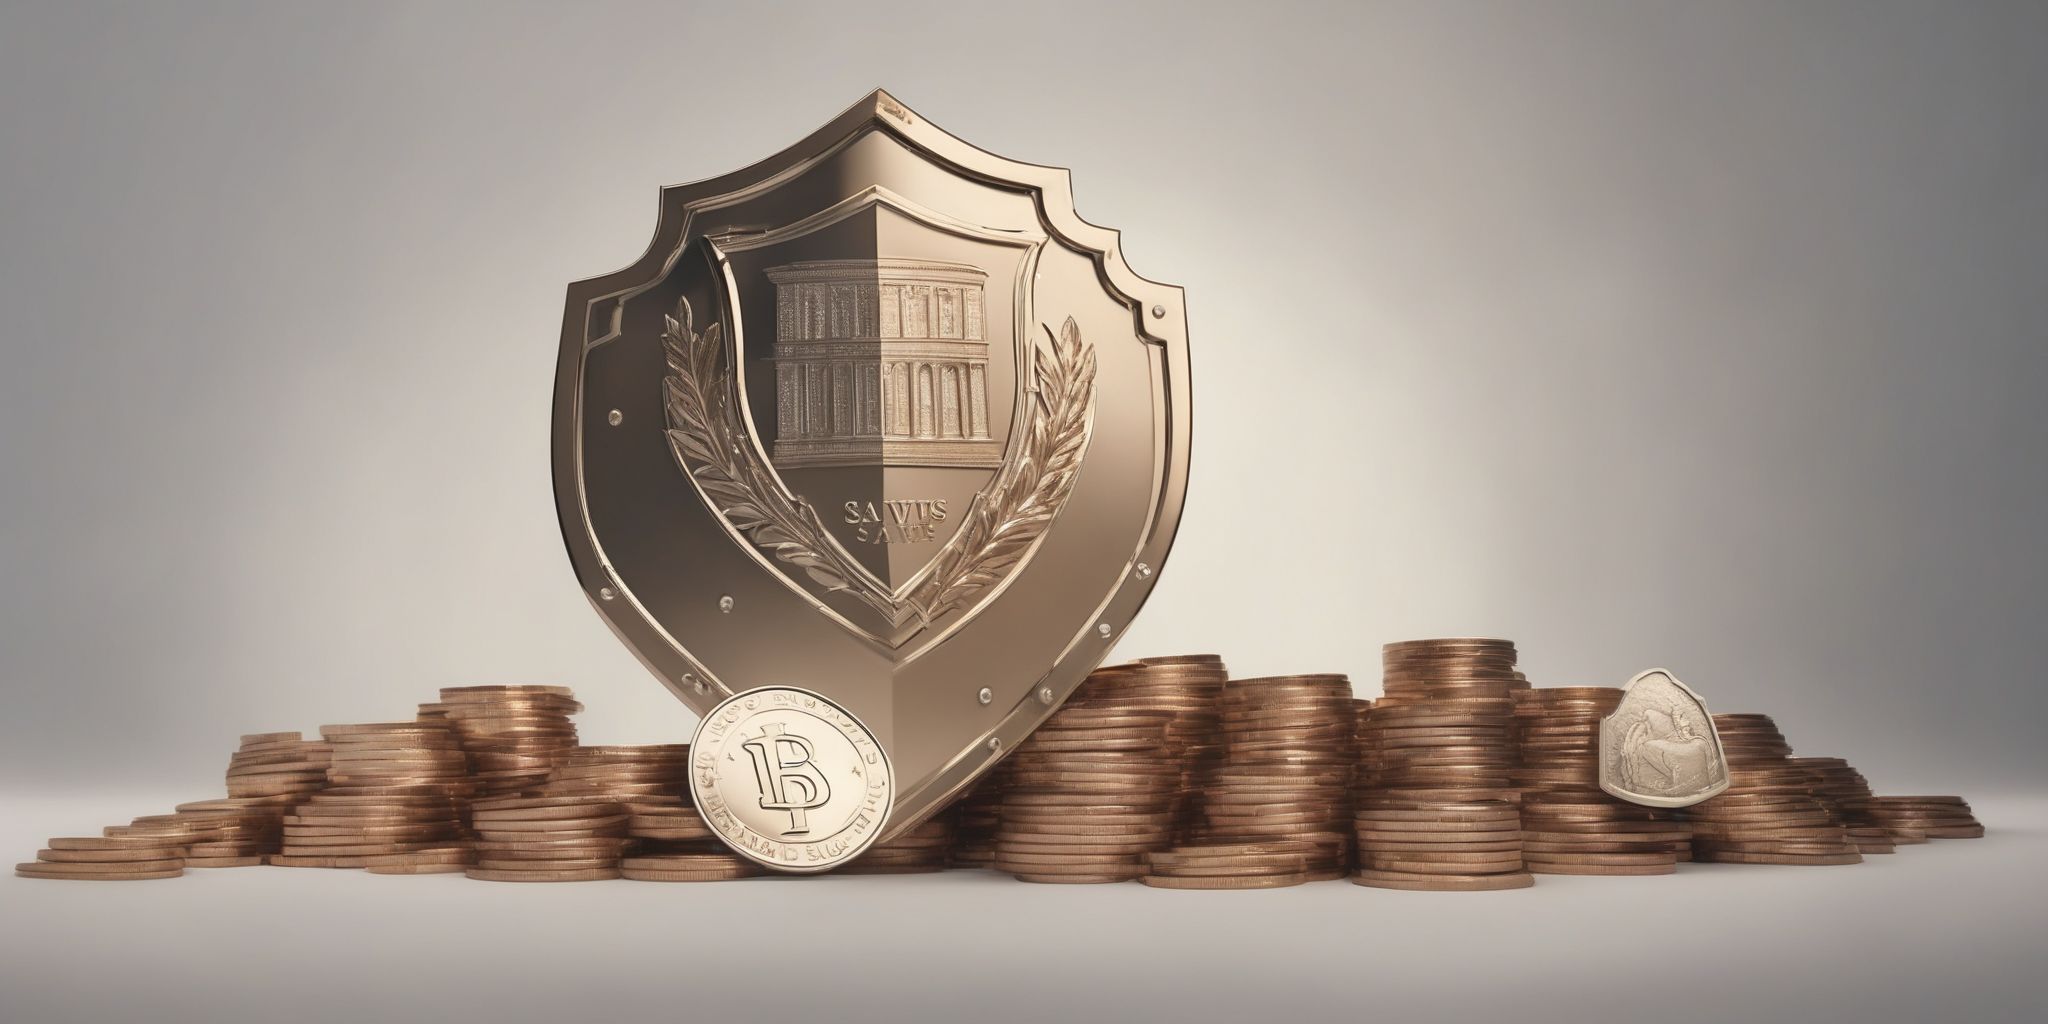 Savings shield  in realistic, photographic style